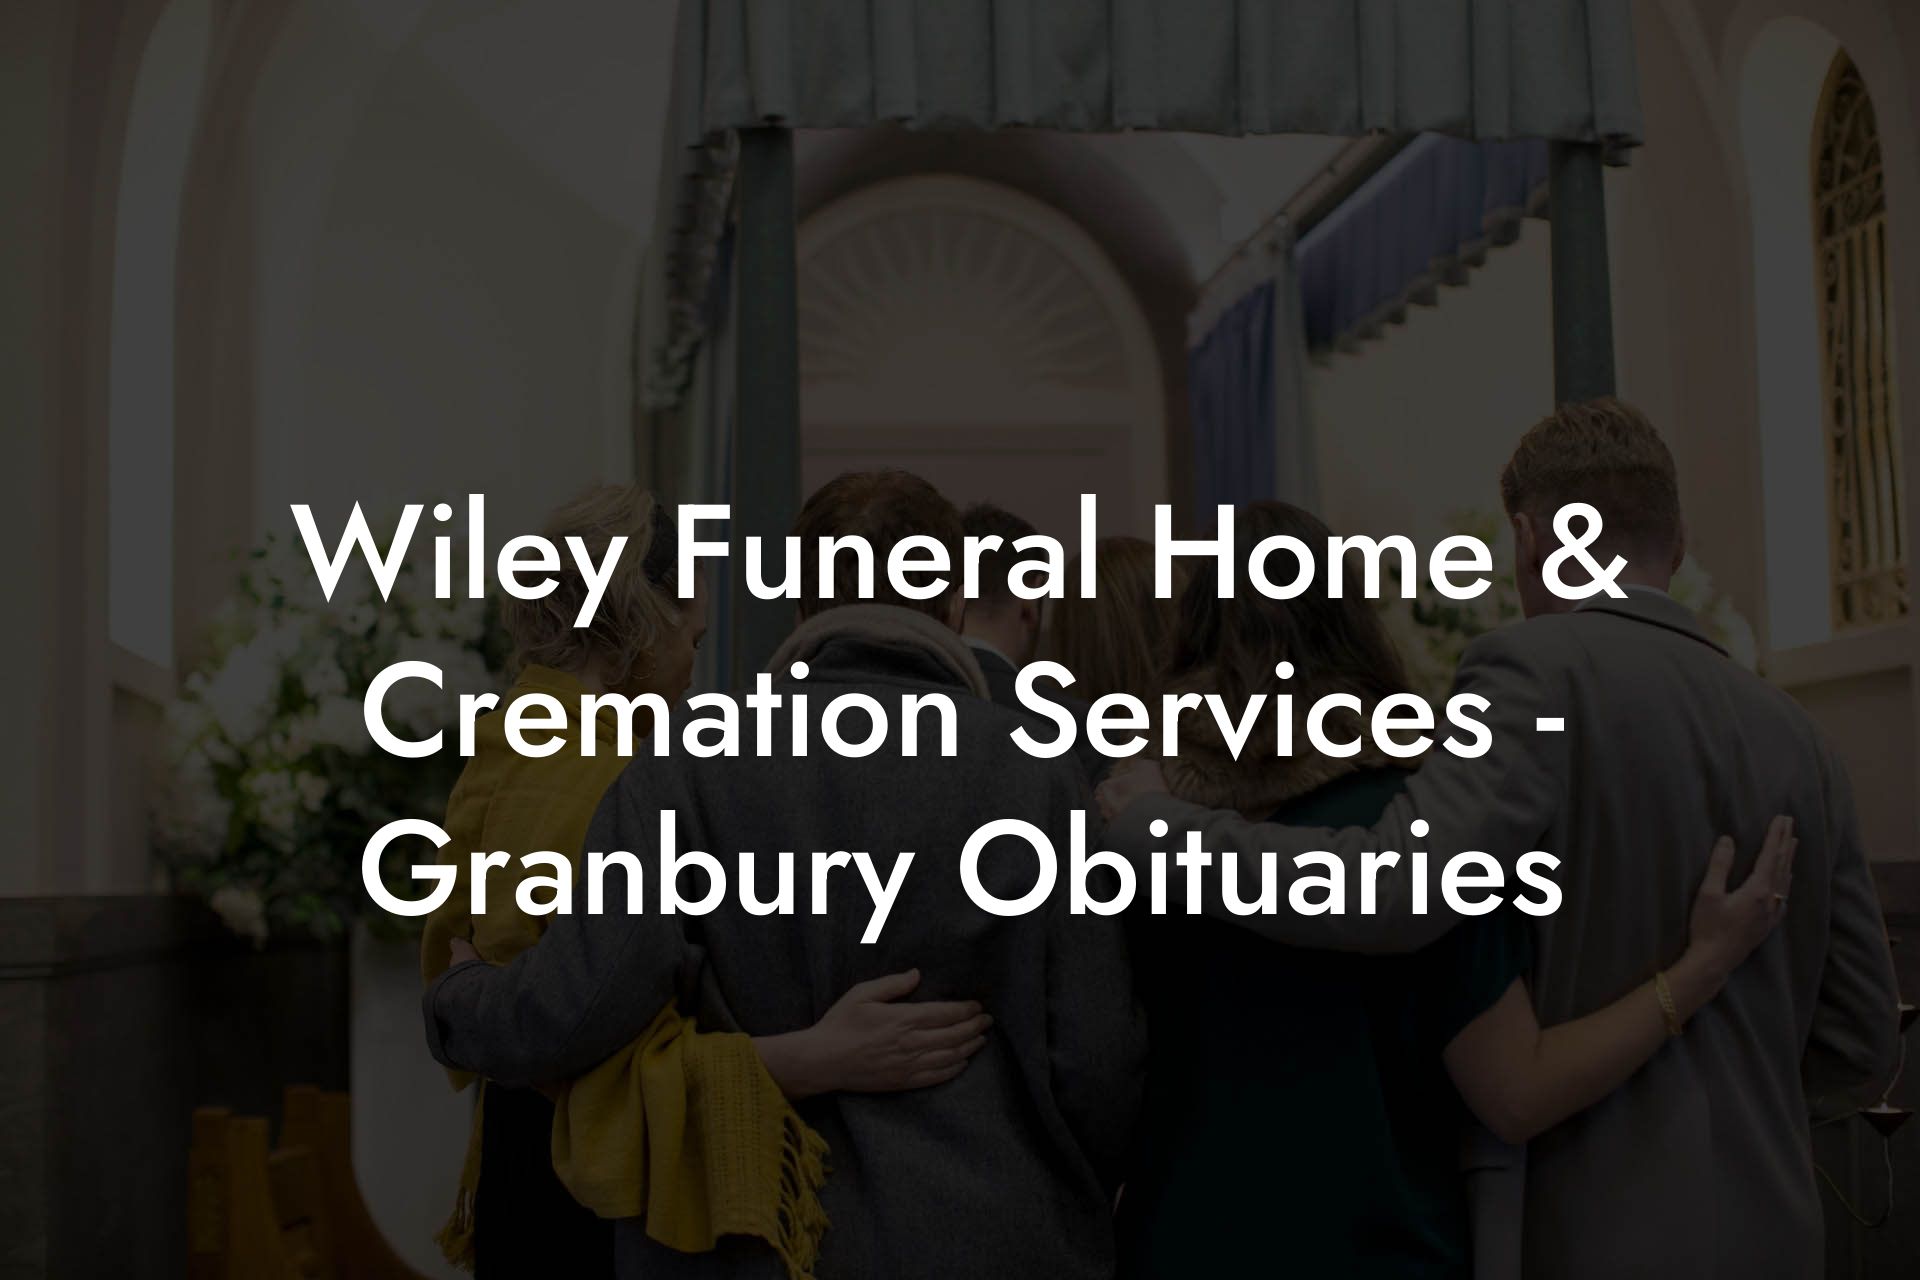 Wiley Funeral Home & Cremation Services – Granbury Obituaries